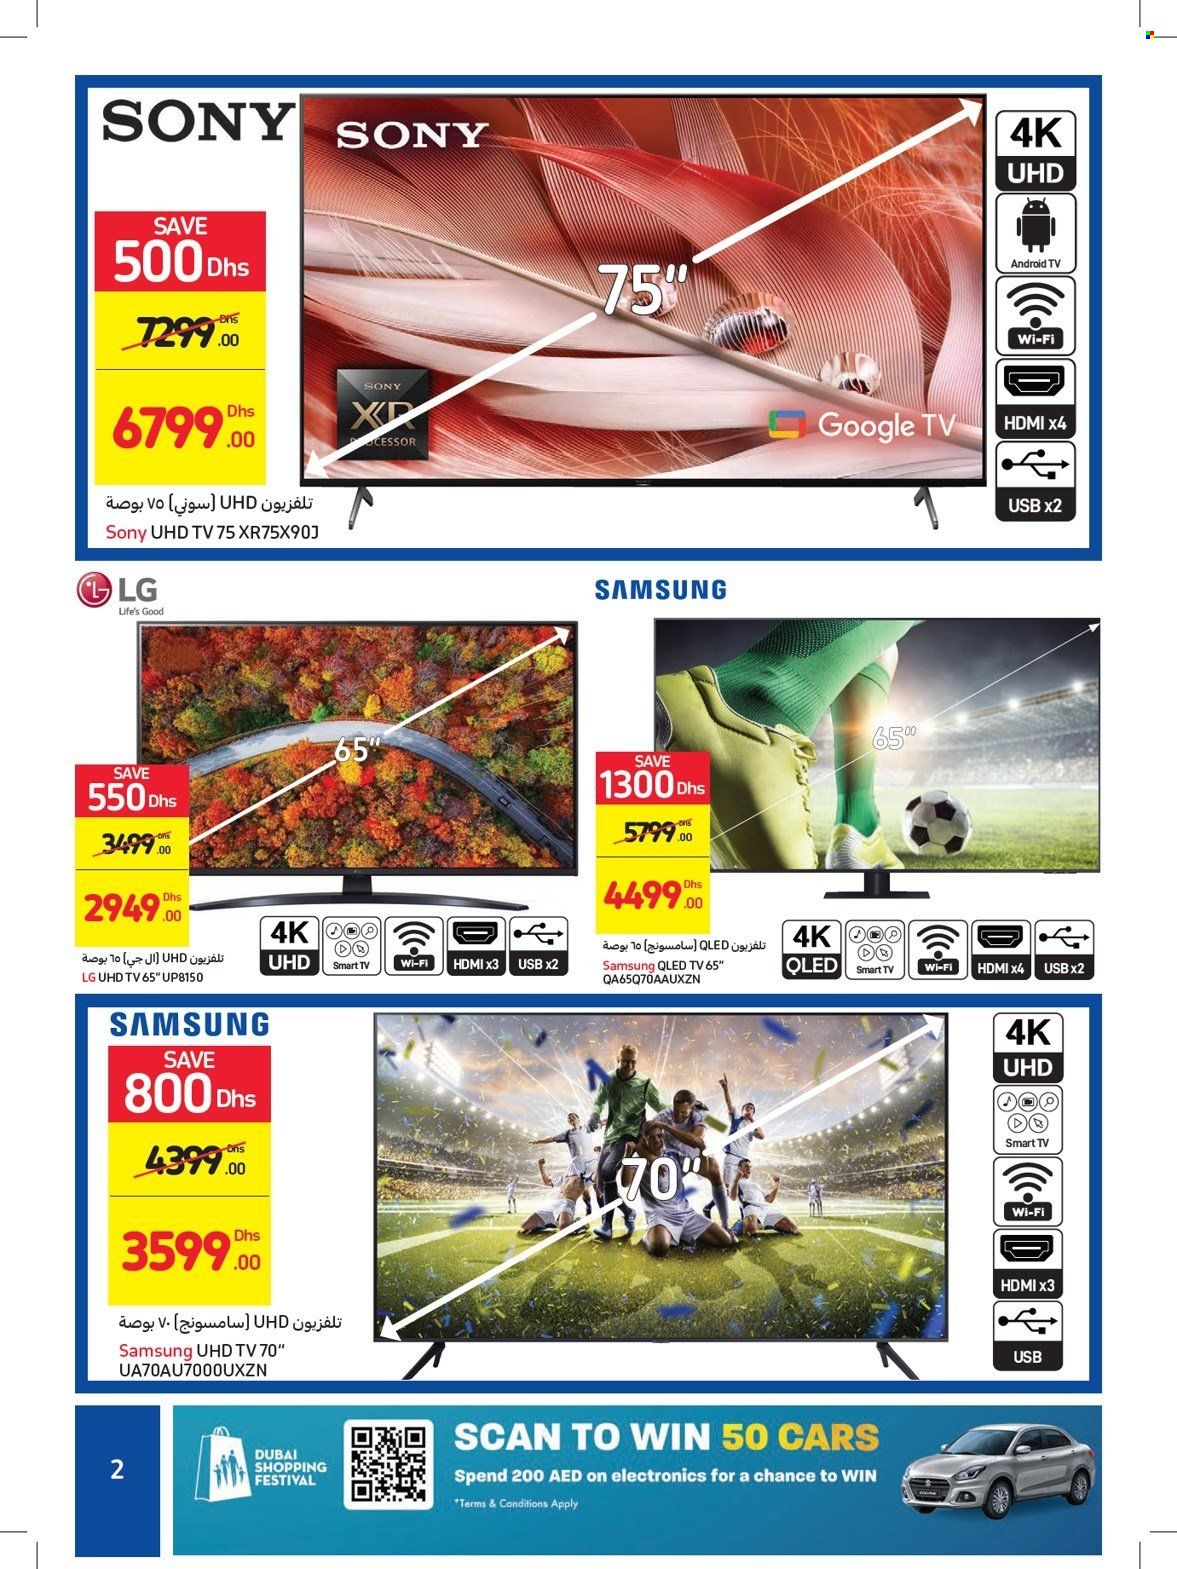 Carrefour offer - 25/12/2021 - 04/01/2022.